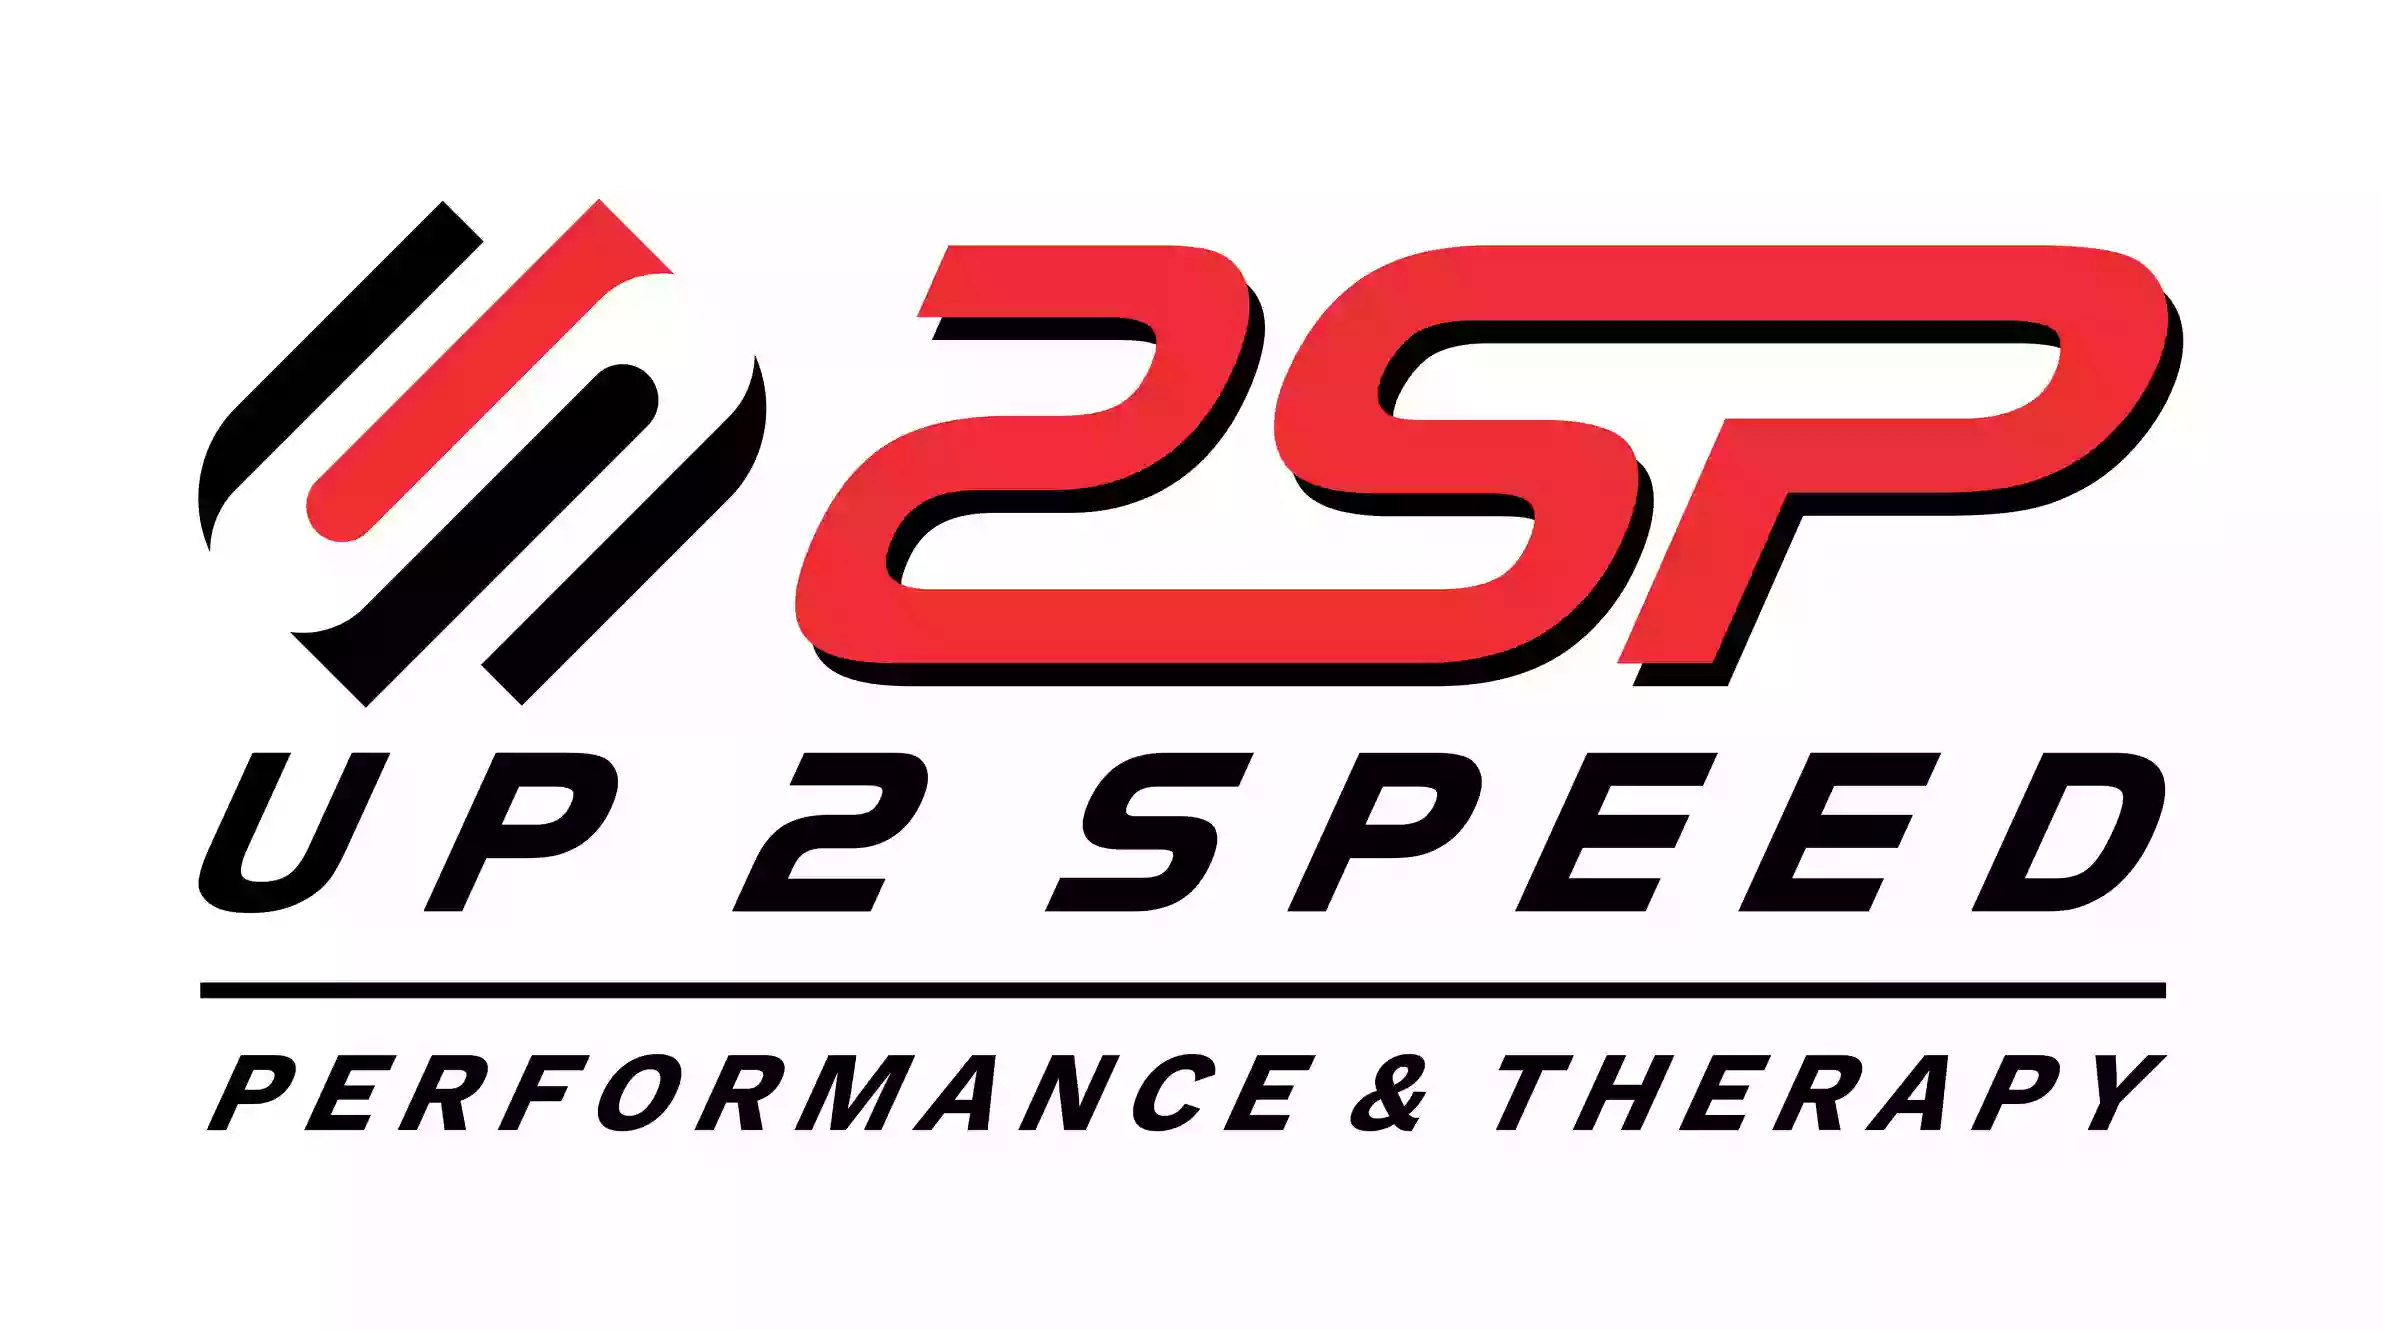 Up 2 Speed Sports Performance & Therapy